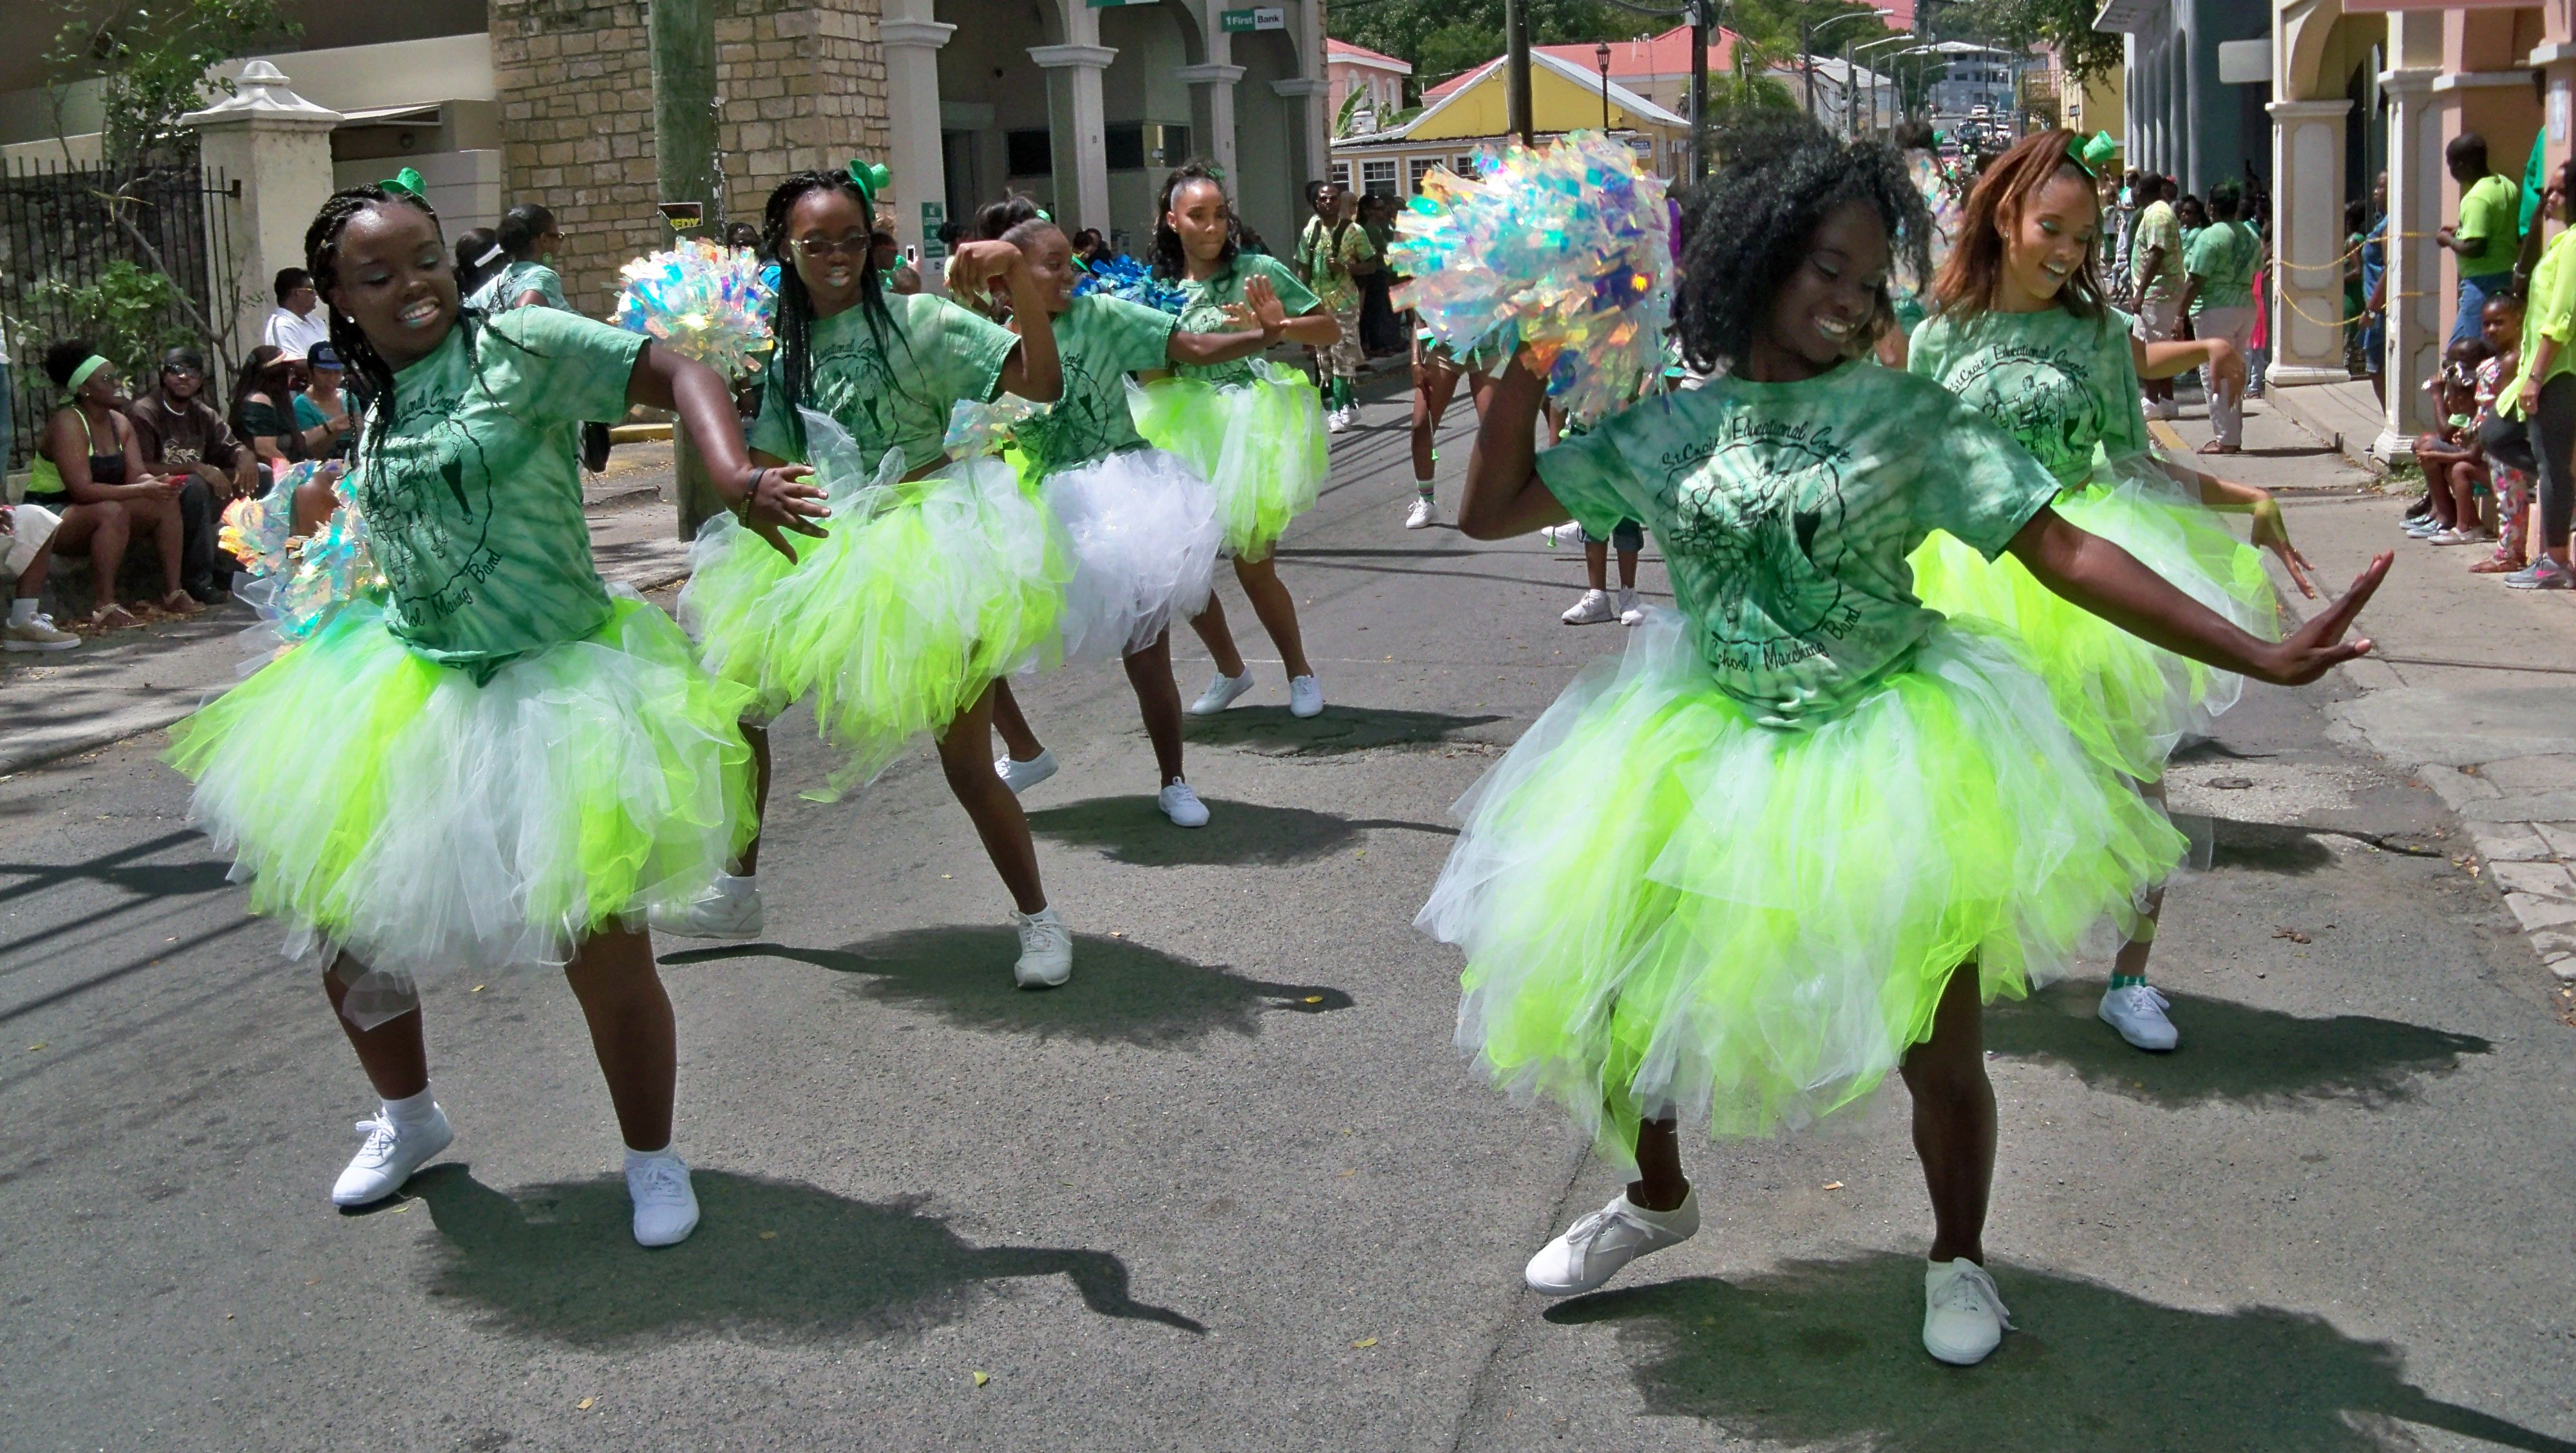 Dancers from the St. Croix Educational Complex twirl in vibrant green tutus.